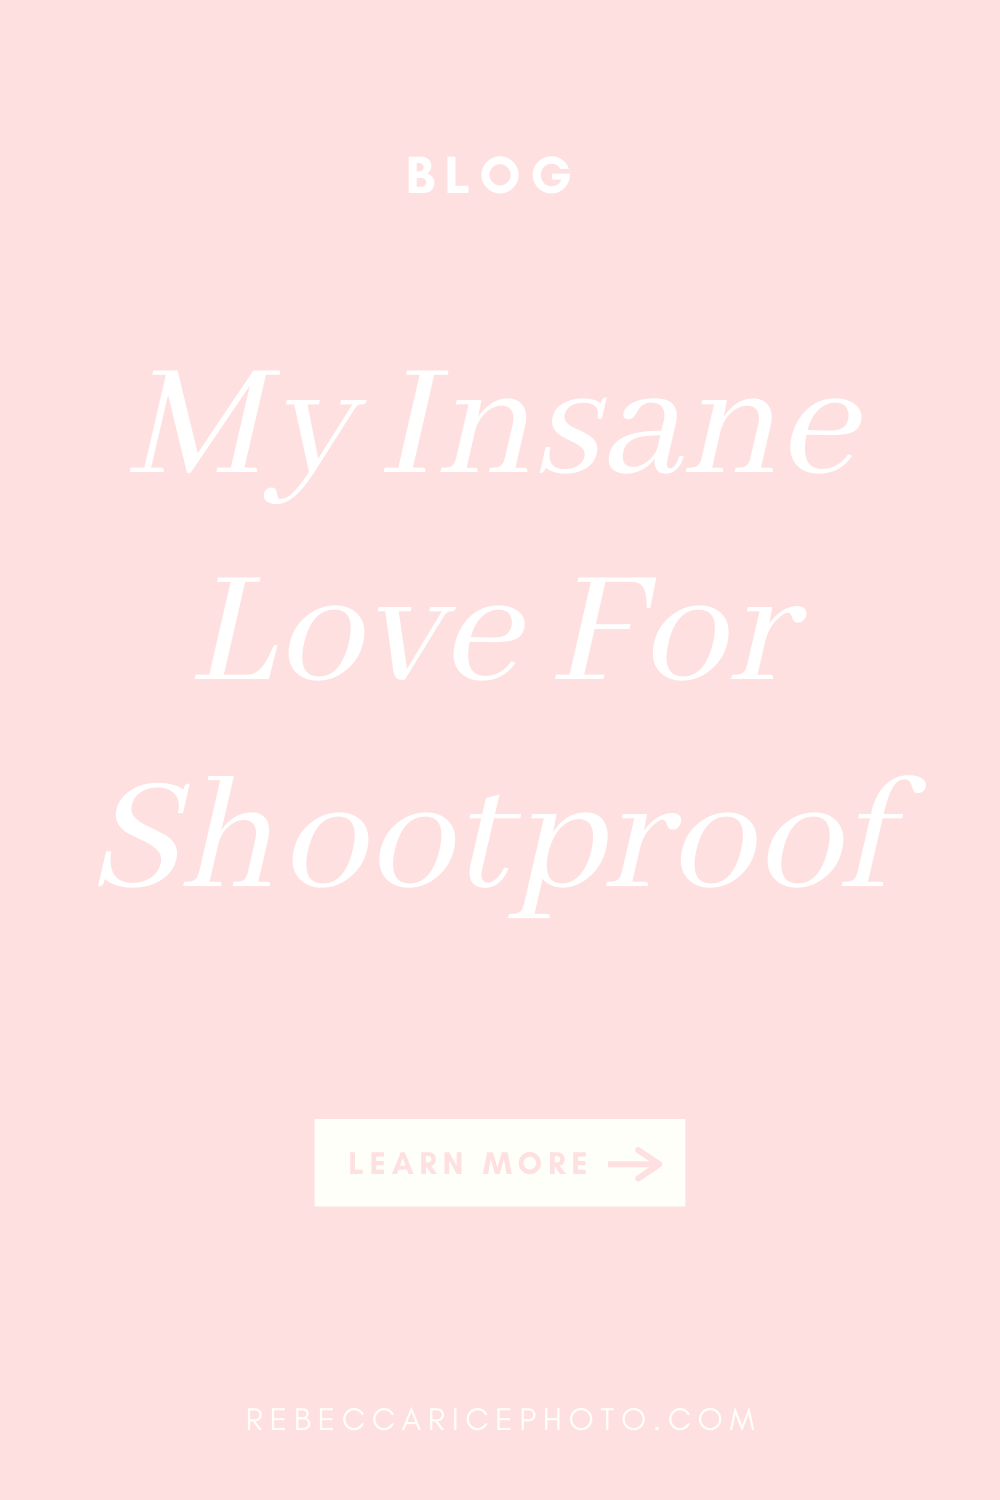 Why I LOVE Shootproof: Rebecca Rice Photography shares her top reasons for using Shootproof as a gallery delivery system for her business